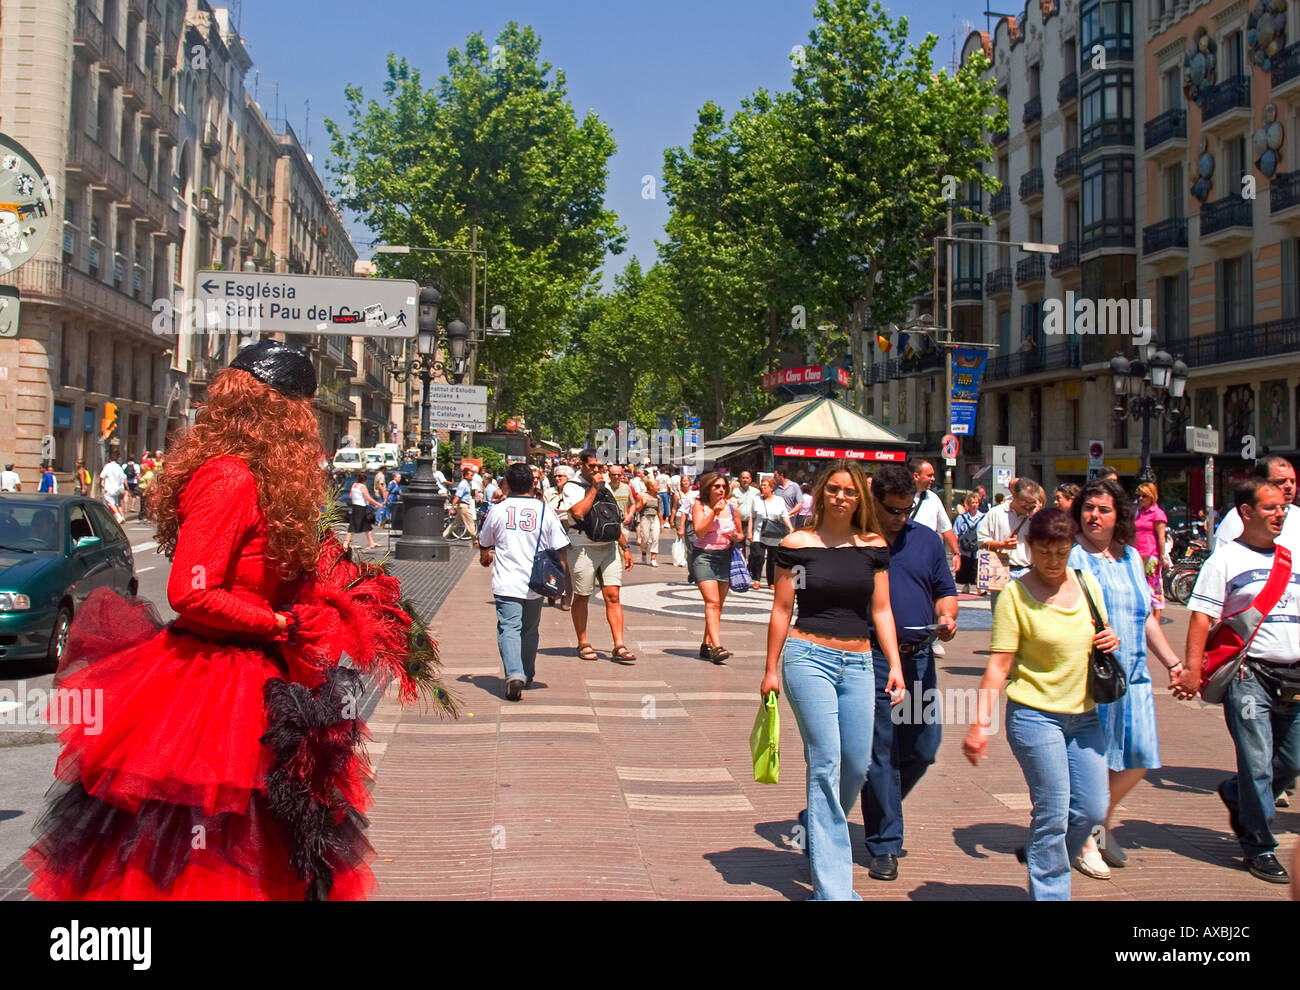 Mango shop located on Passeig de Gracia, one of the most expensive streets  in Europe Stock Photo - Alamy